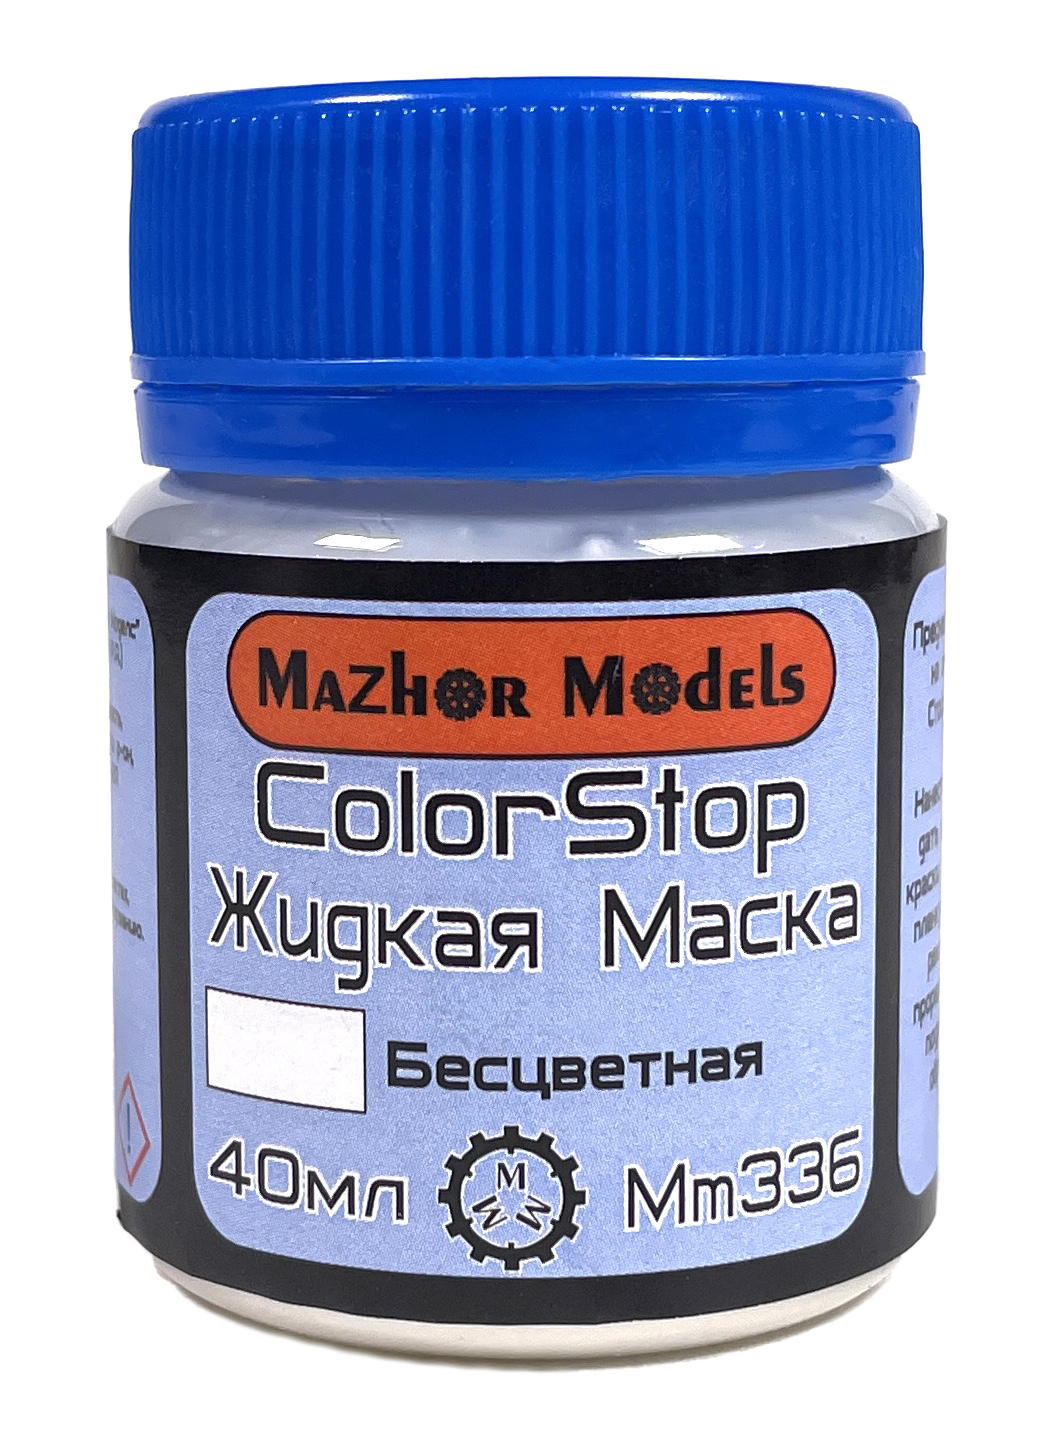 Liquid Mask (Color stop) Colorless 40 ml (Mazhor Models)